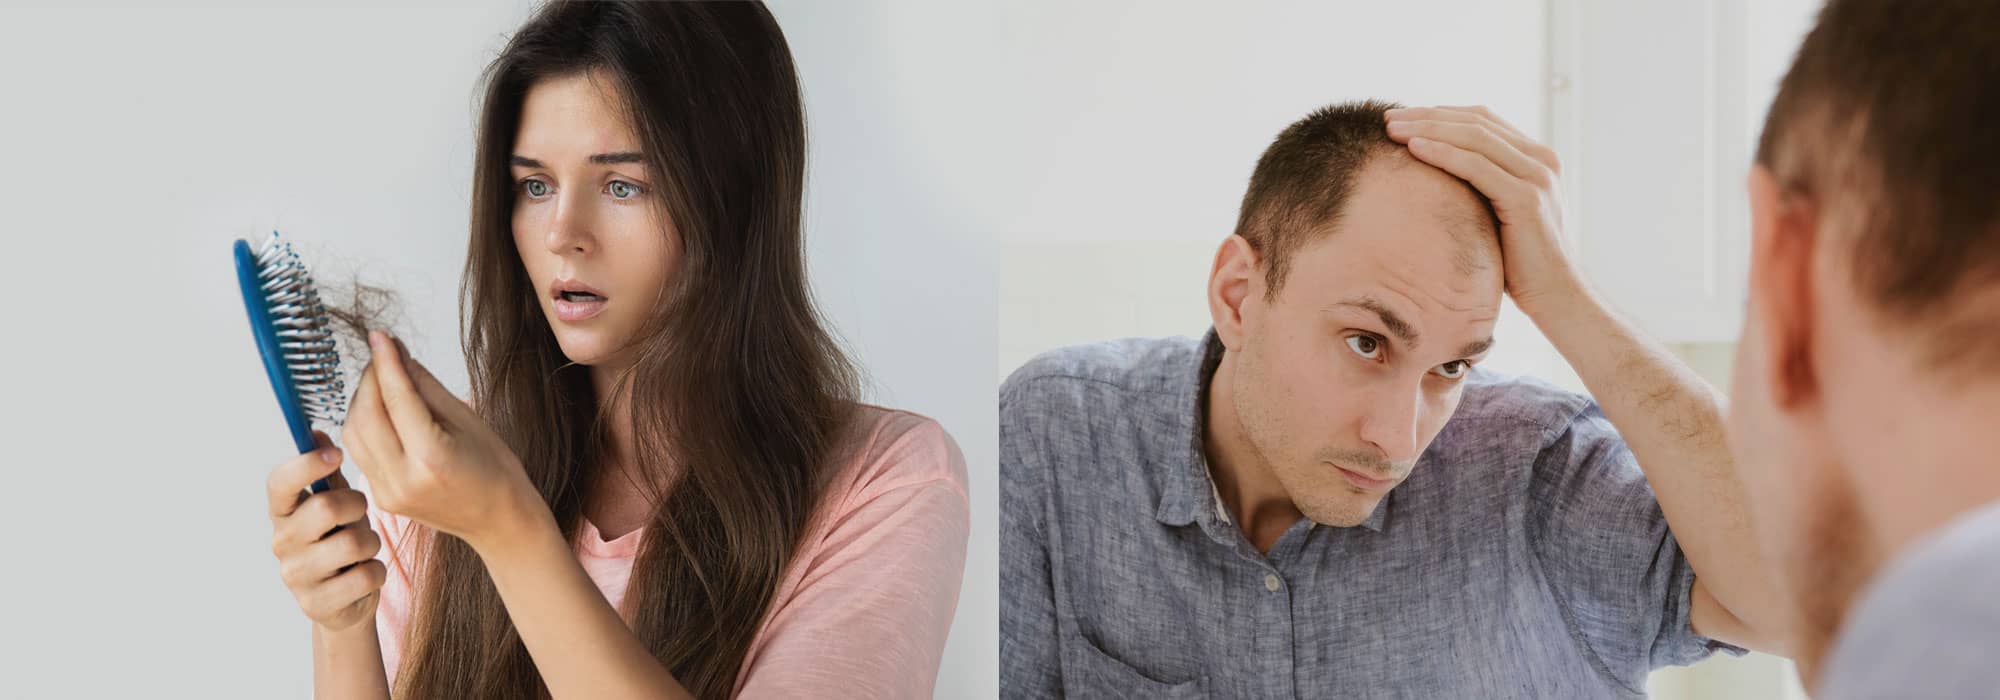 Man and woman dealing with hair loss